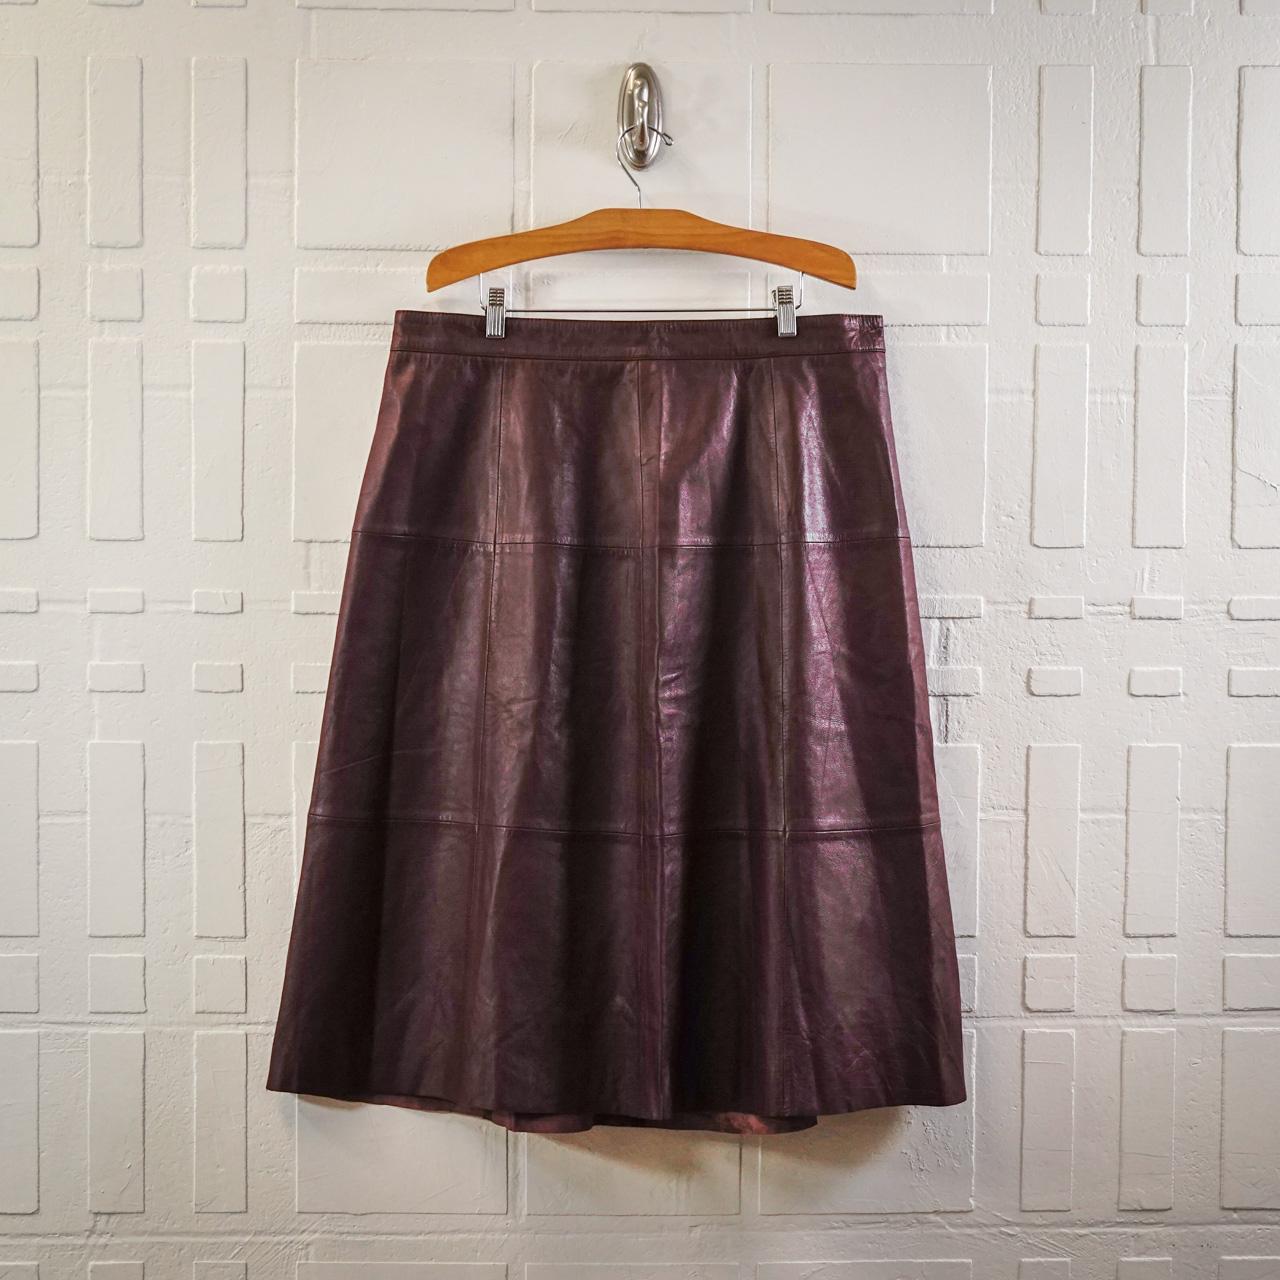 Product Image 1 - Jessica London Leather Ponte Skirt
*new